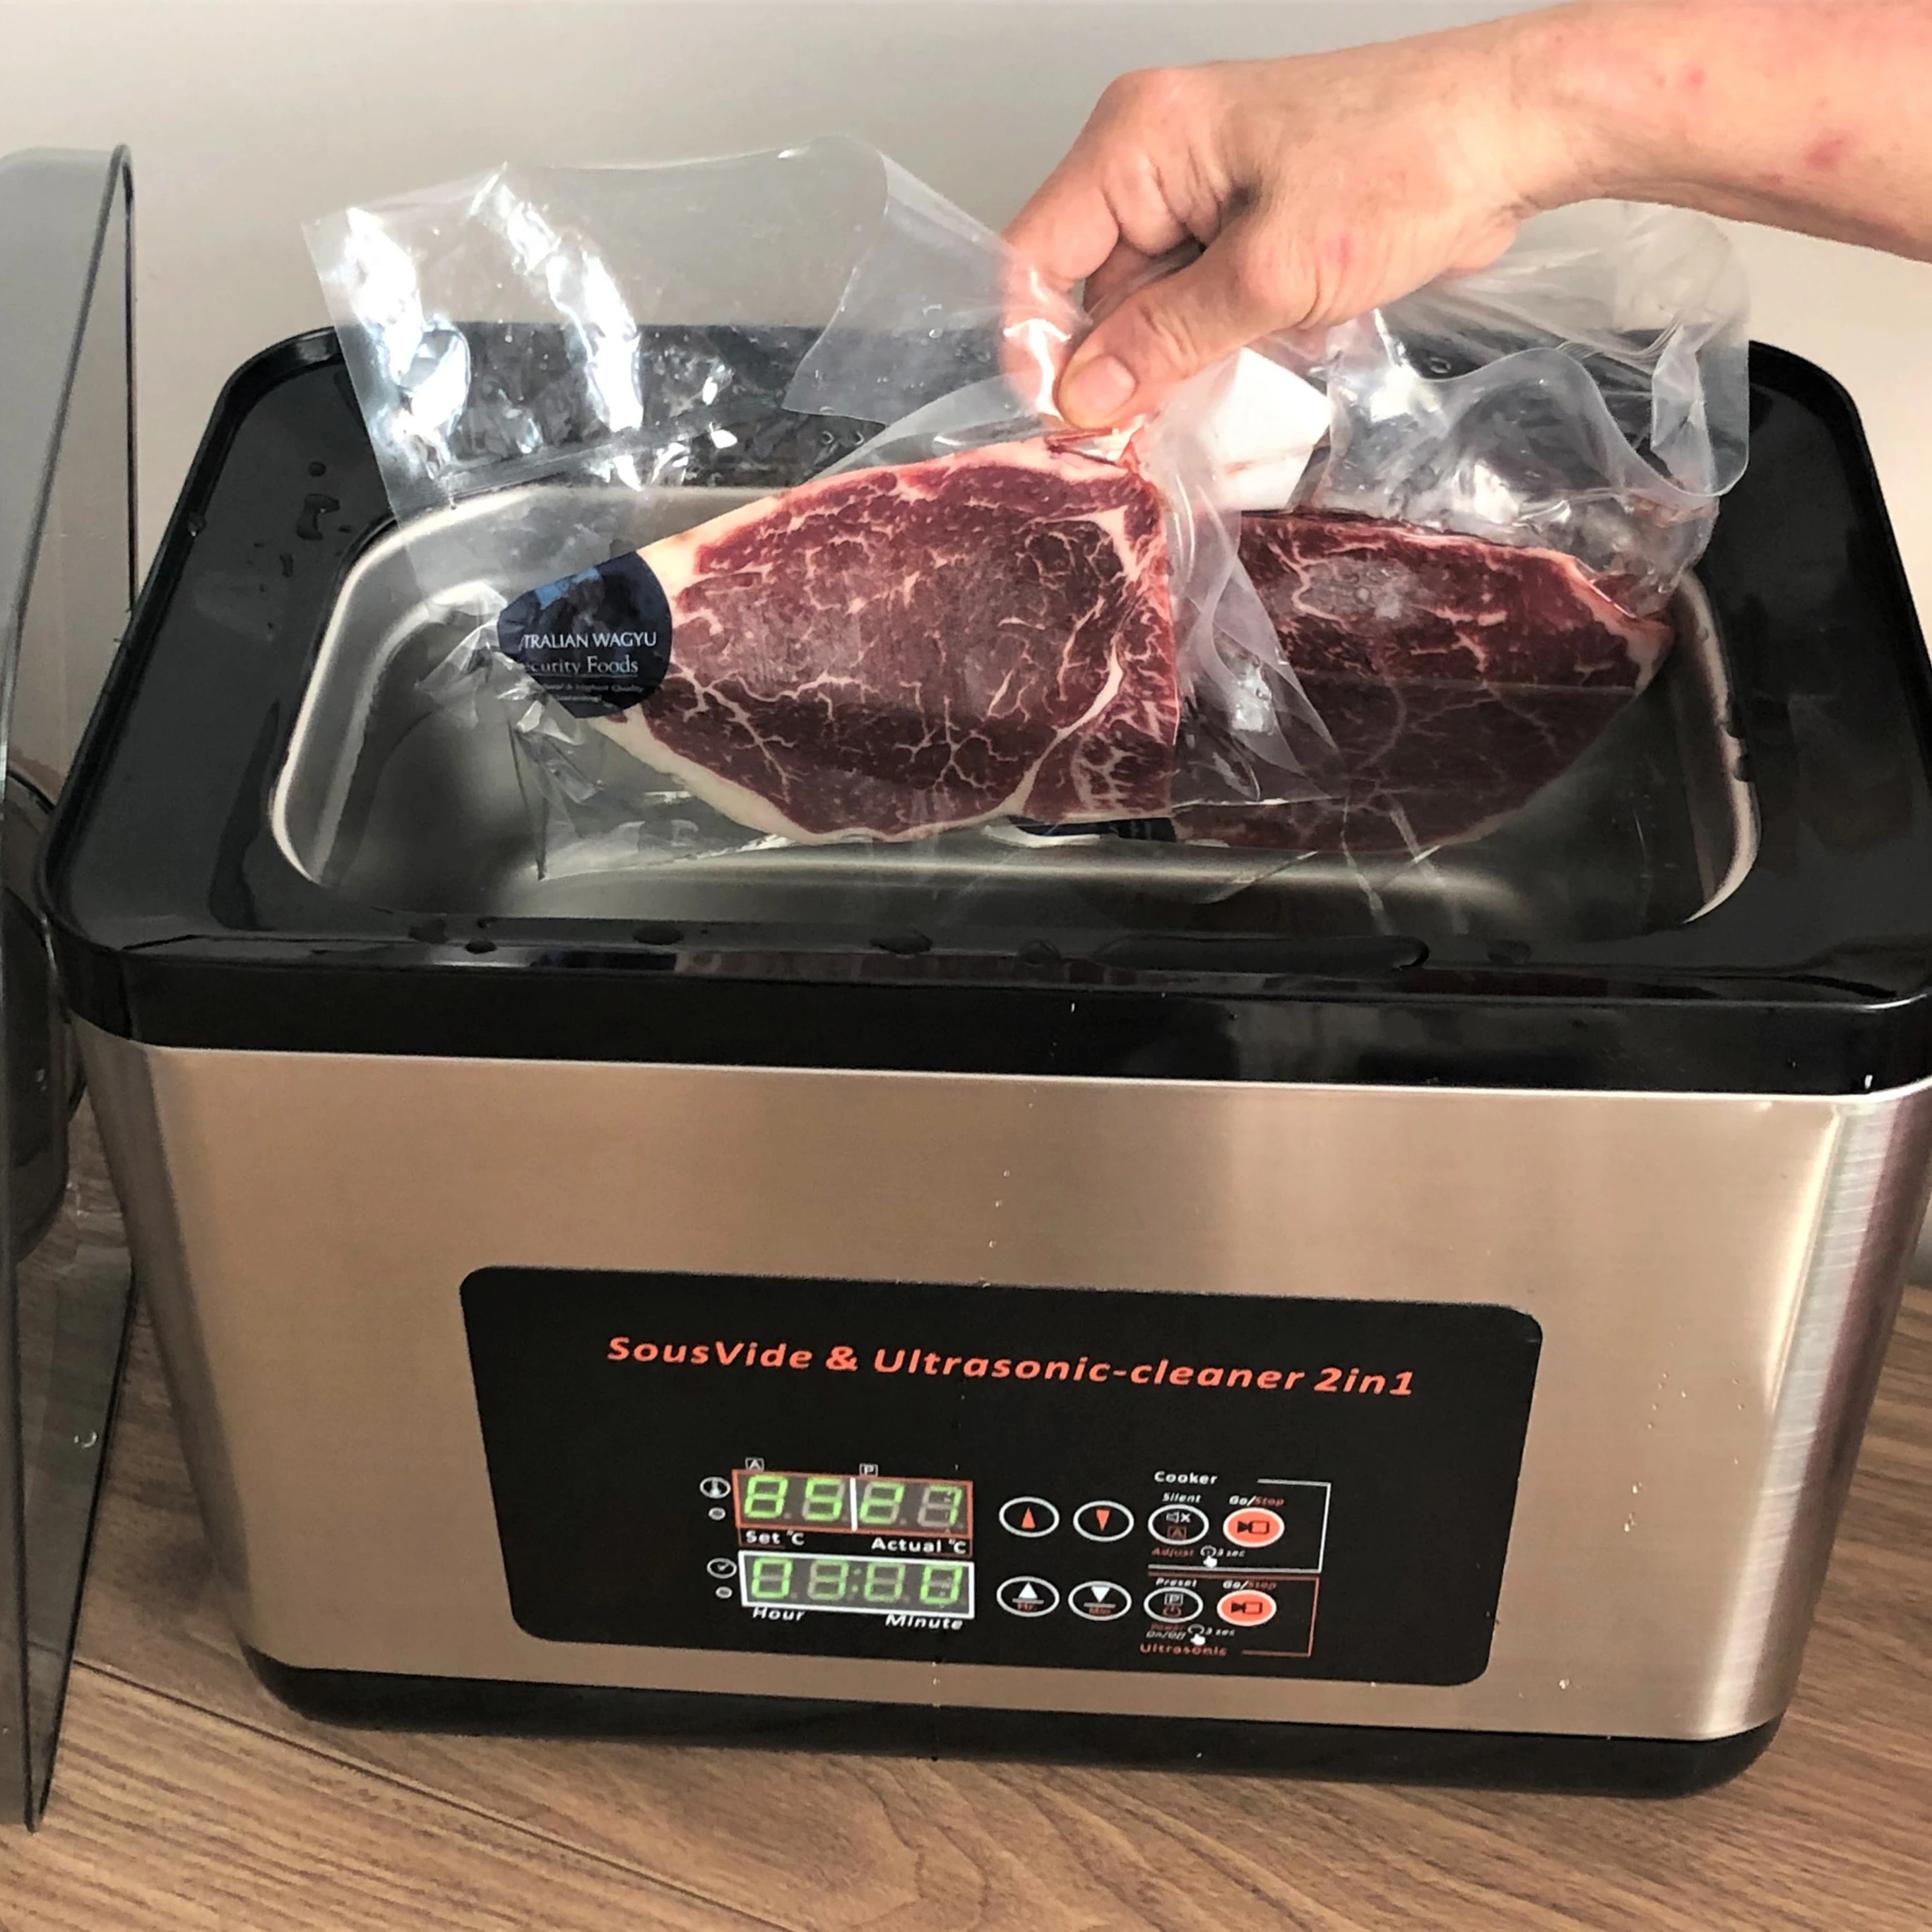 

Ultrasonic added better taste and Tenderising hard tissue Even heated whole water bath premium home use 6L Sous Vide slow cooker